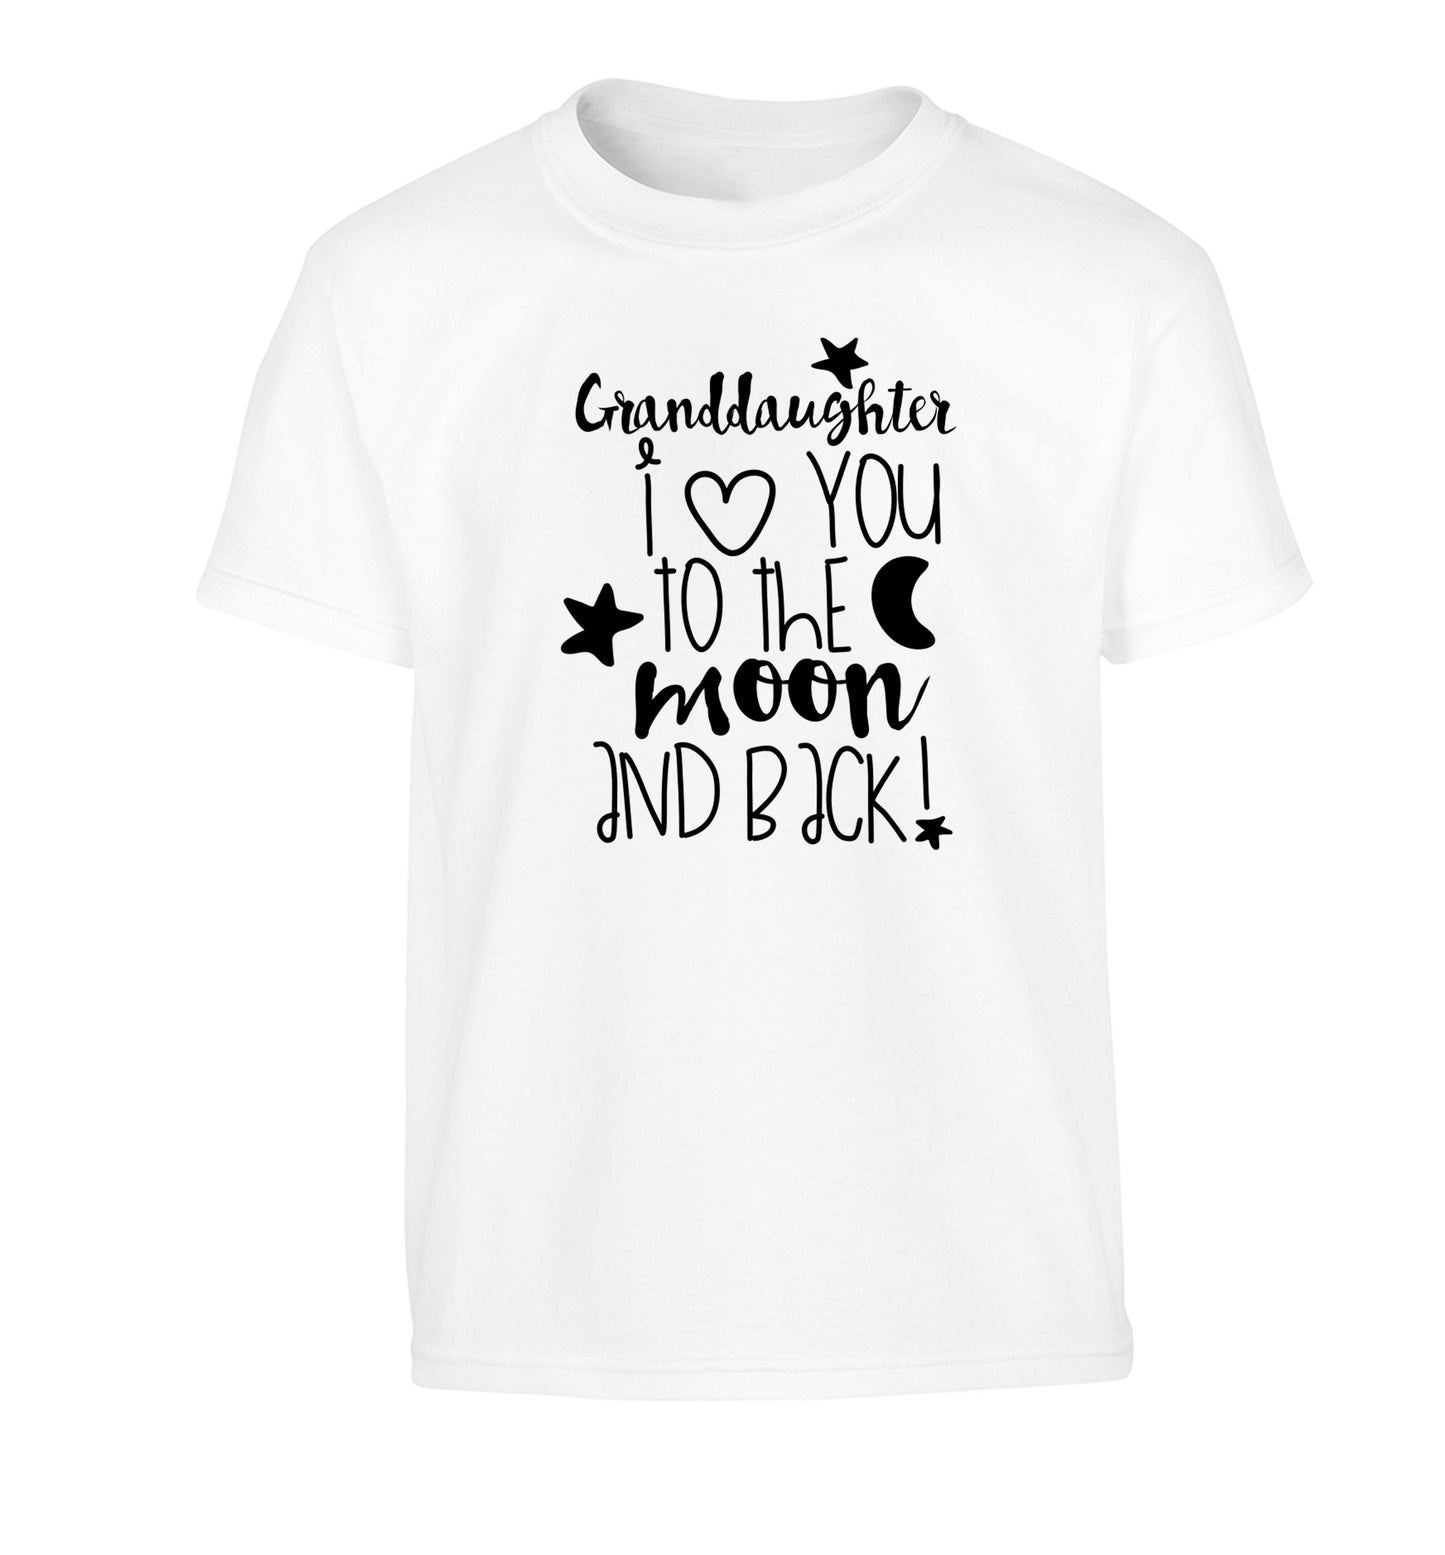 Granddaughter I love you to the moon and back Children's white Tshirt 12-14 Years